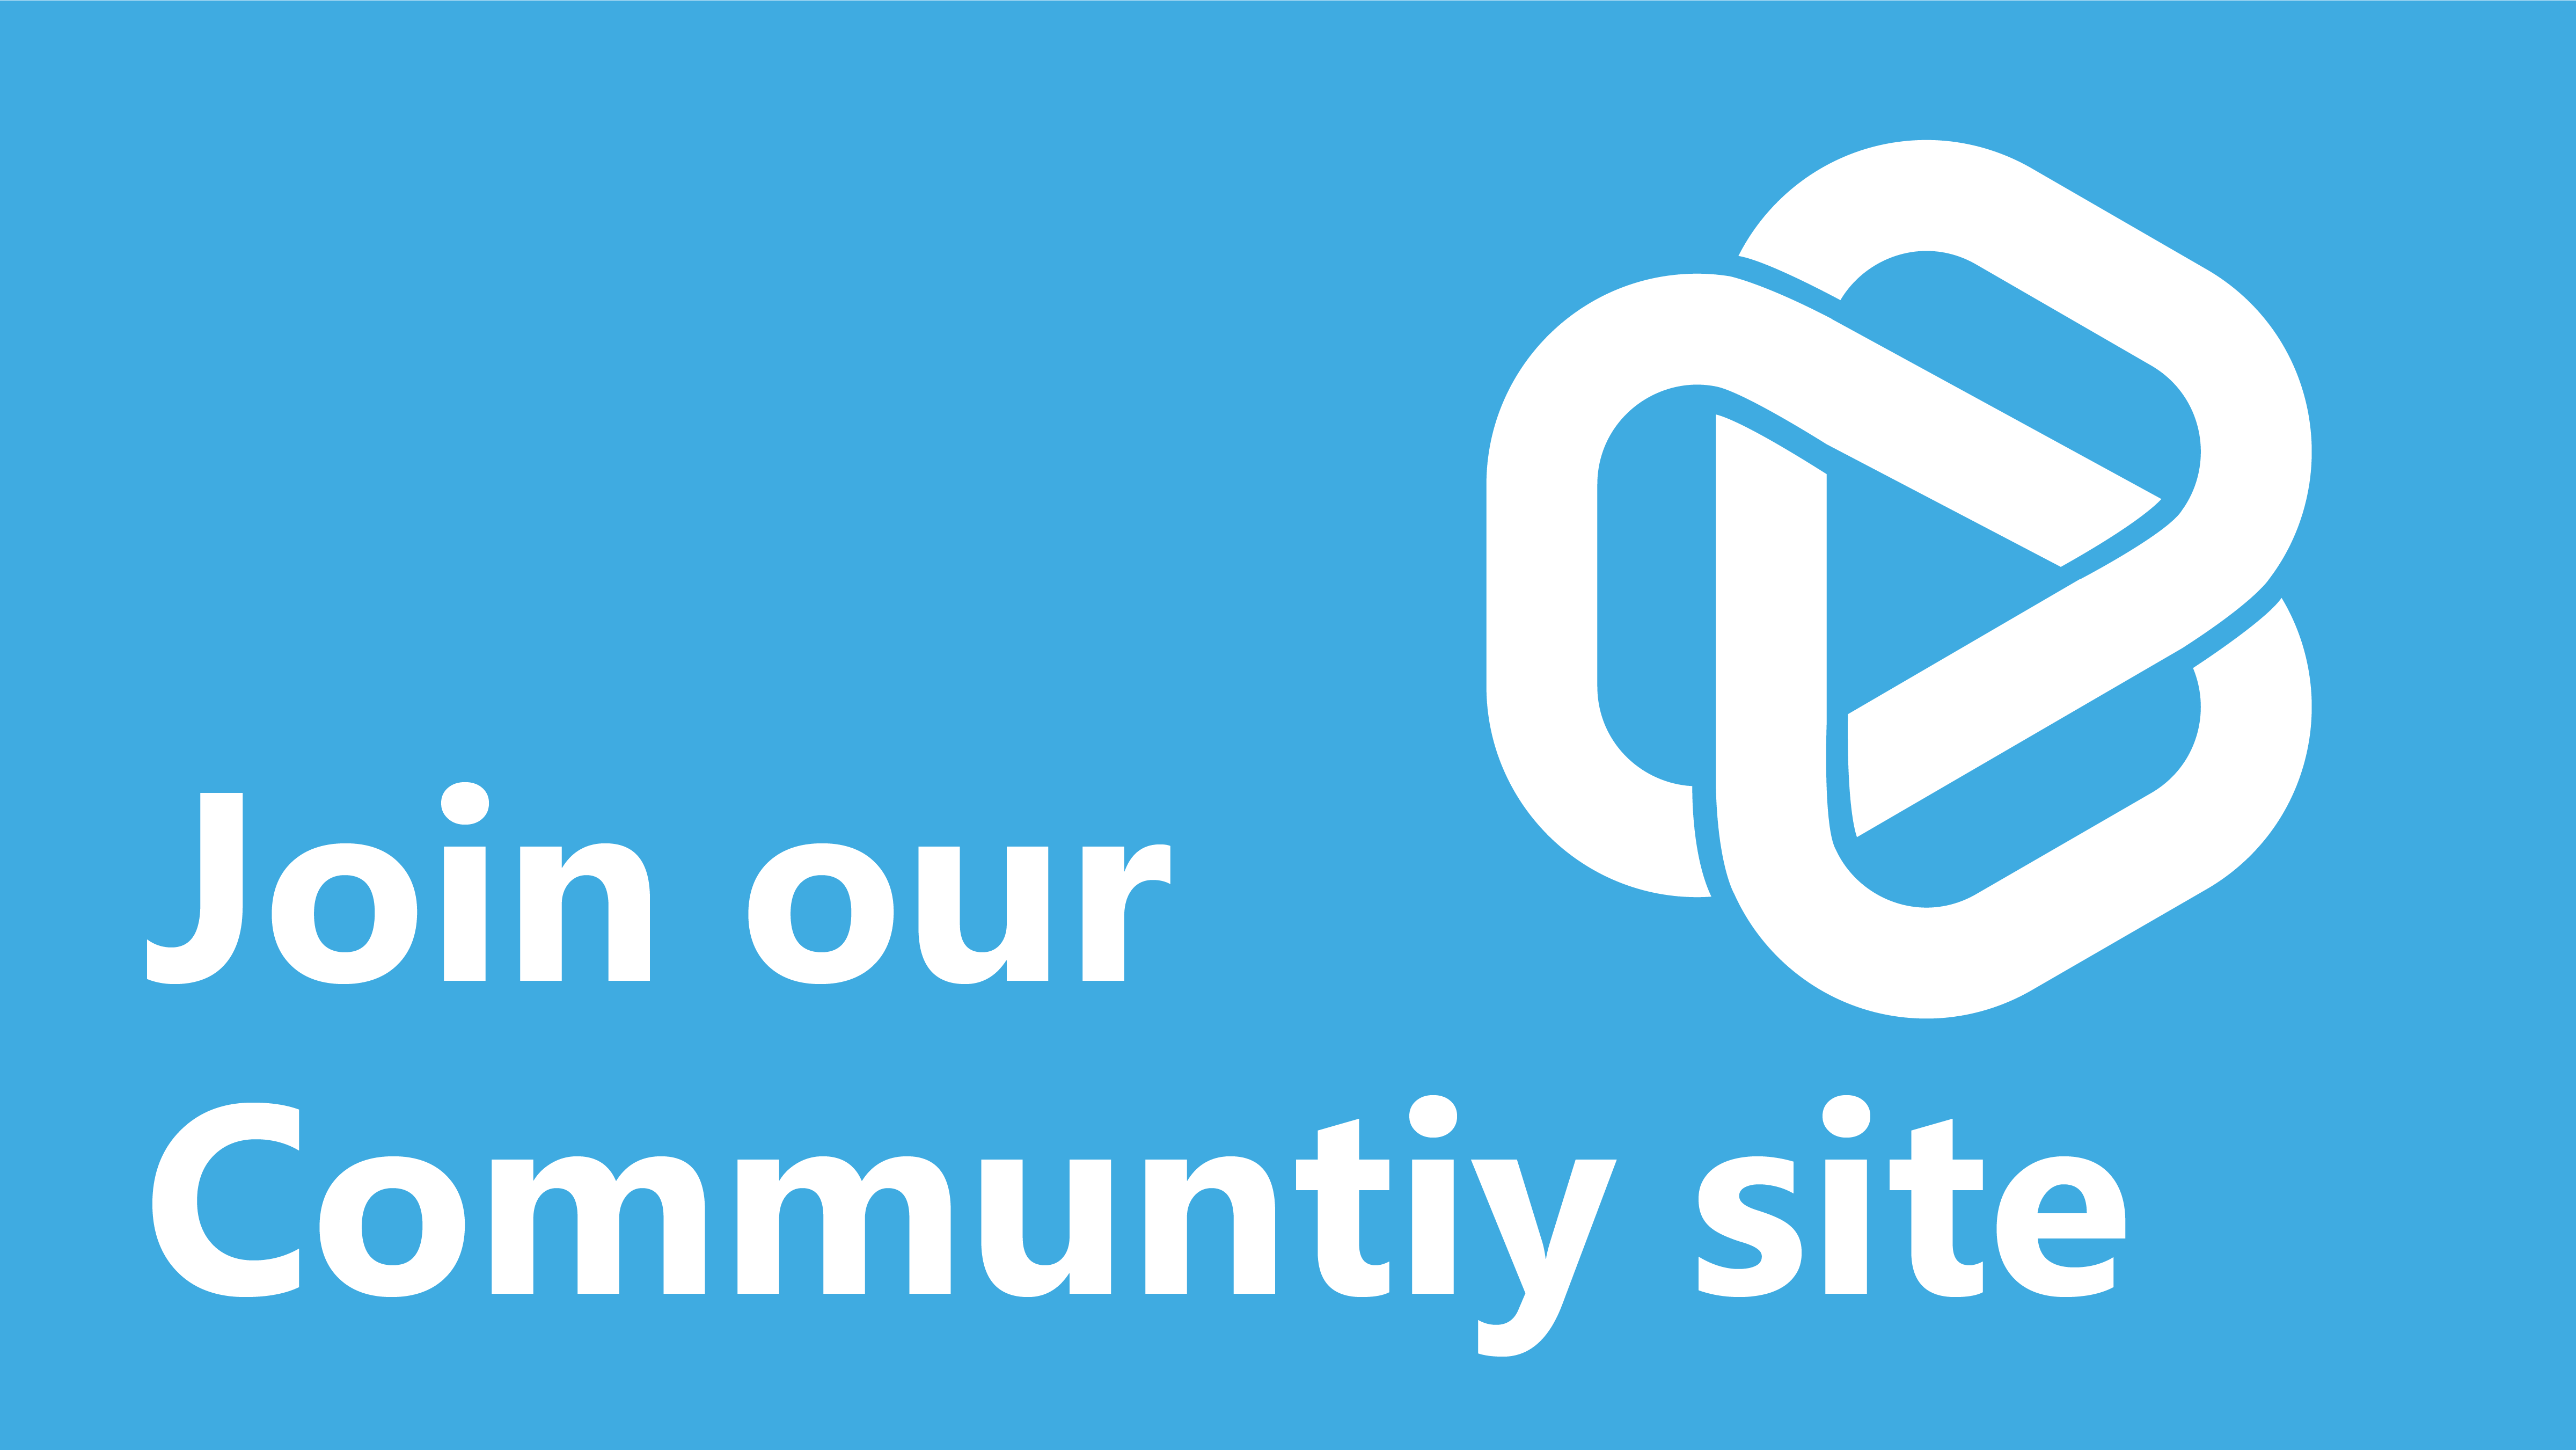 Join our Community site.